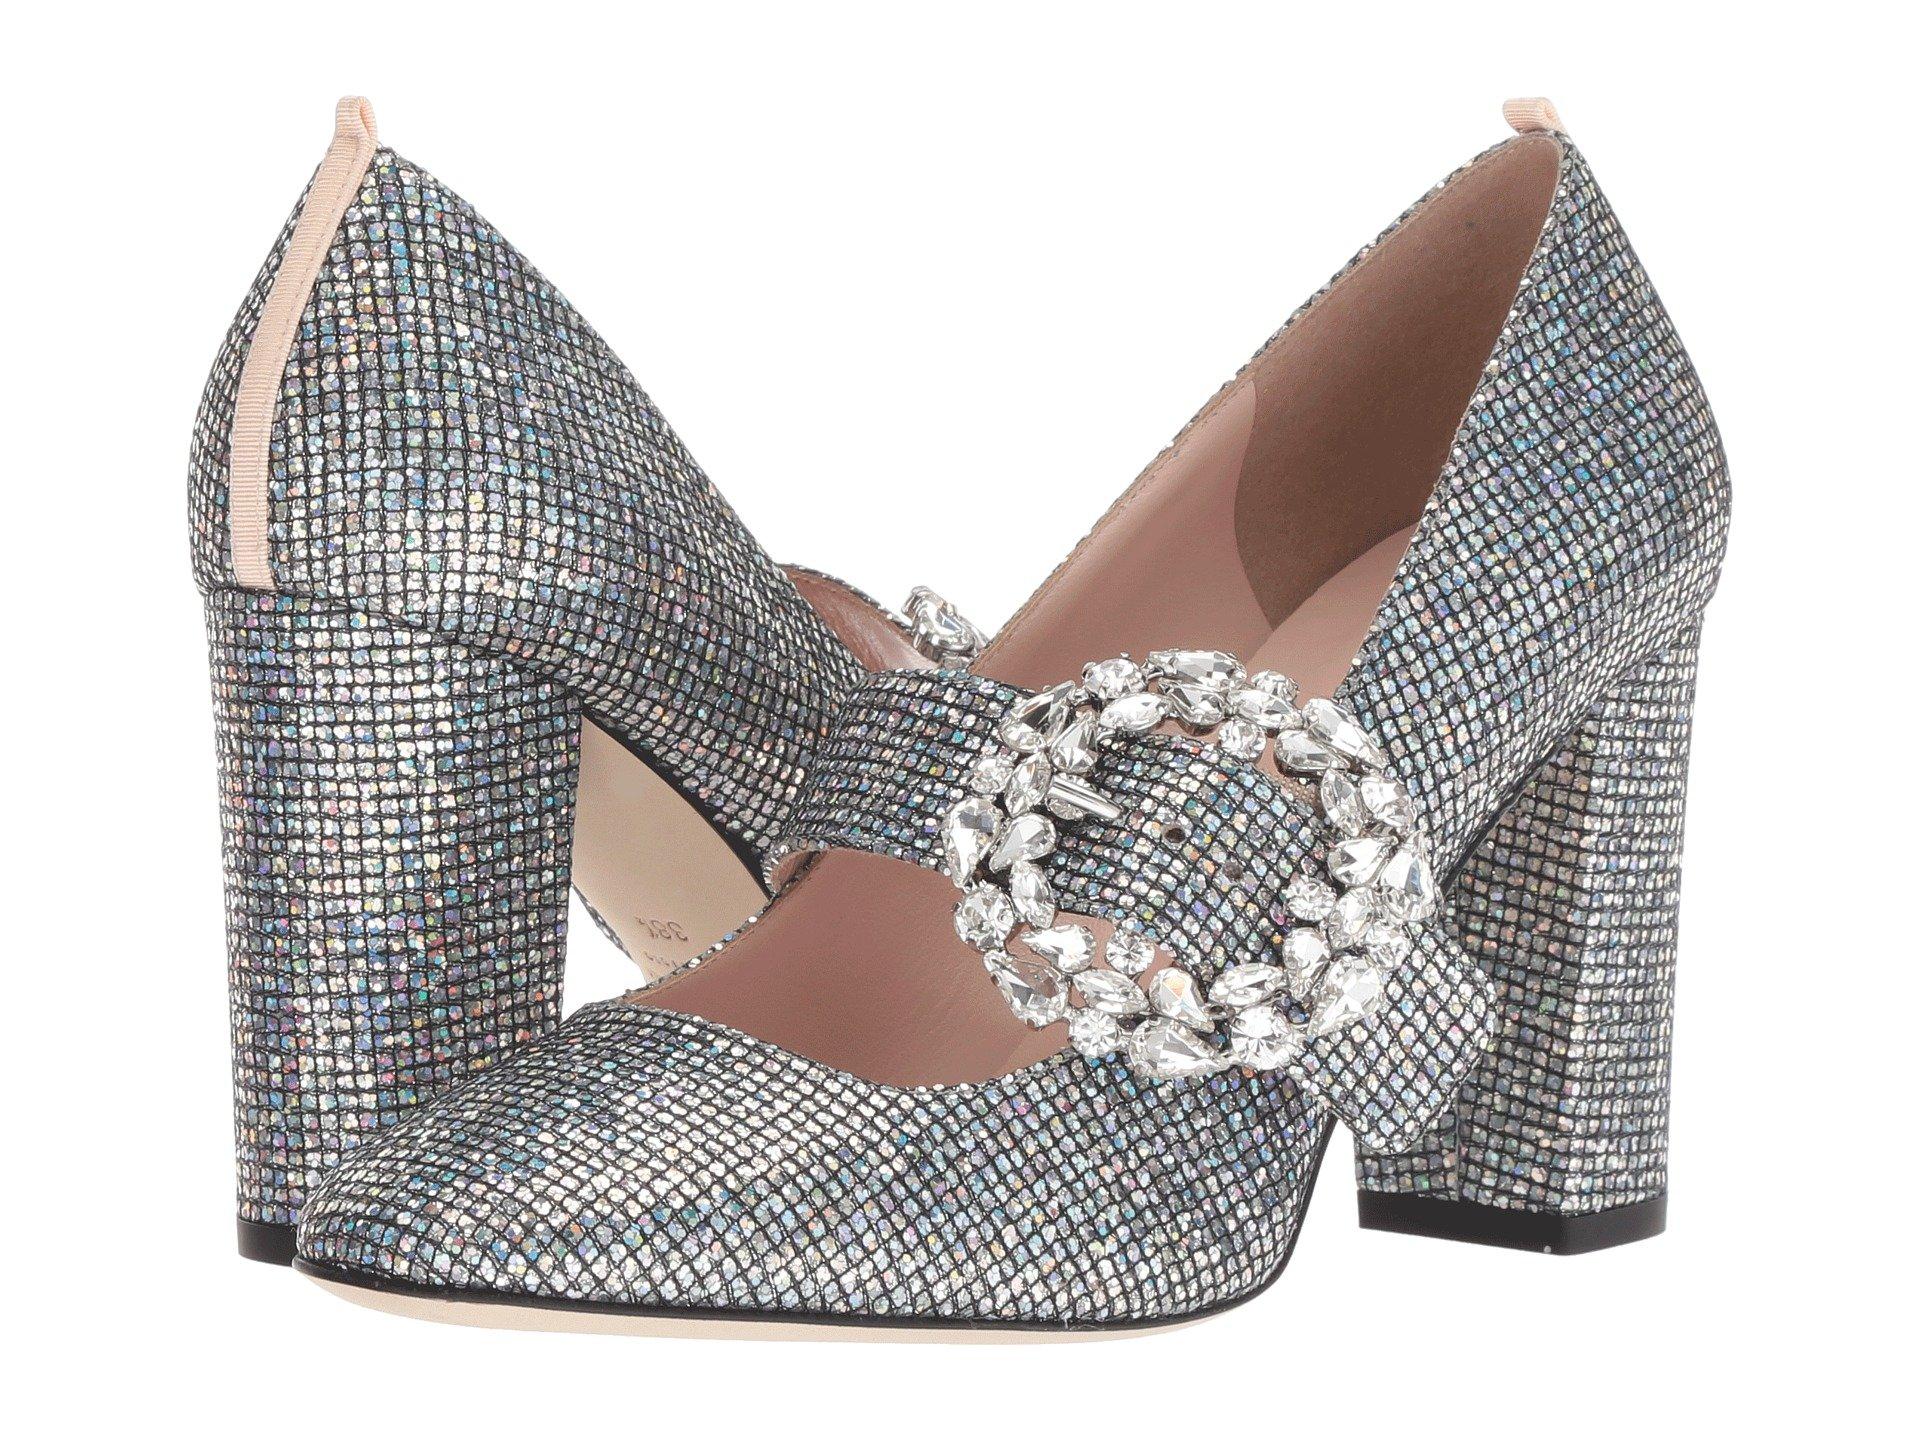 SJP by Sarah Jessica Parker Leather Celine Glitter Mary-jane Heels in Silver  (Metallic) - Save 63% - Lyst